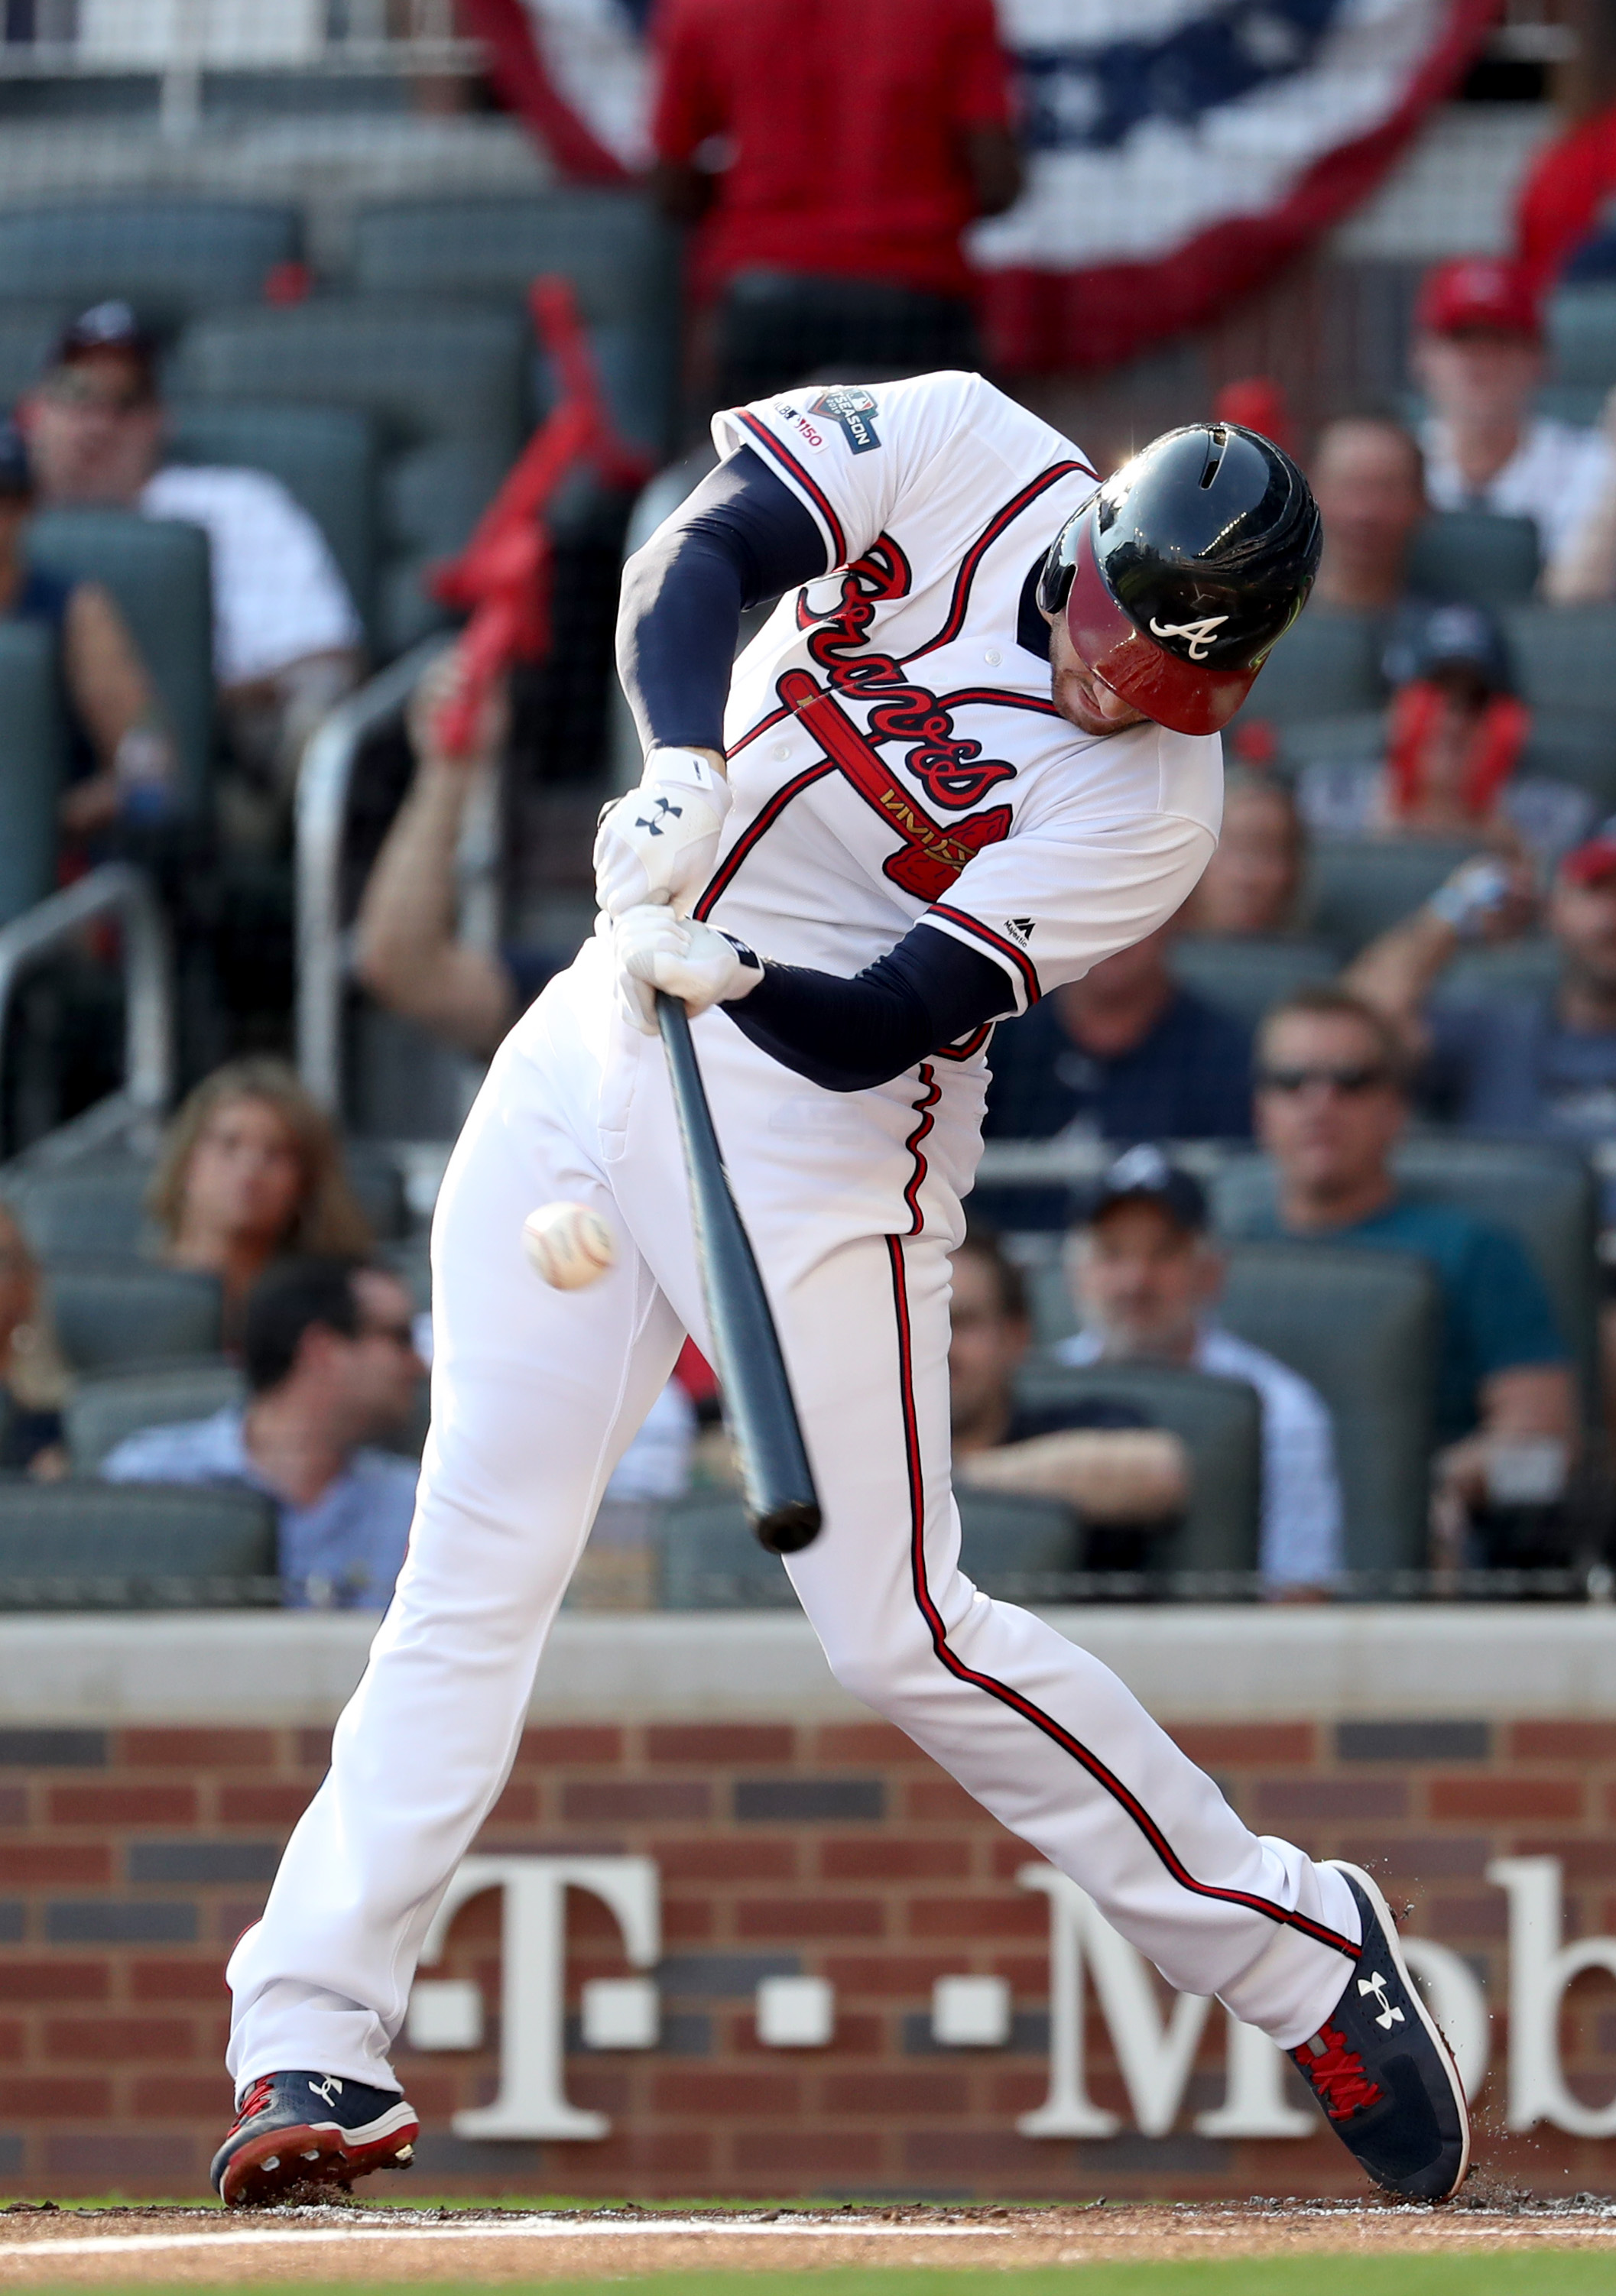 Braves manager Brian Snitker's message after benching Marcell Ozuna for  lack of hustle